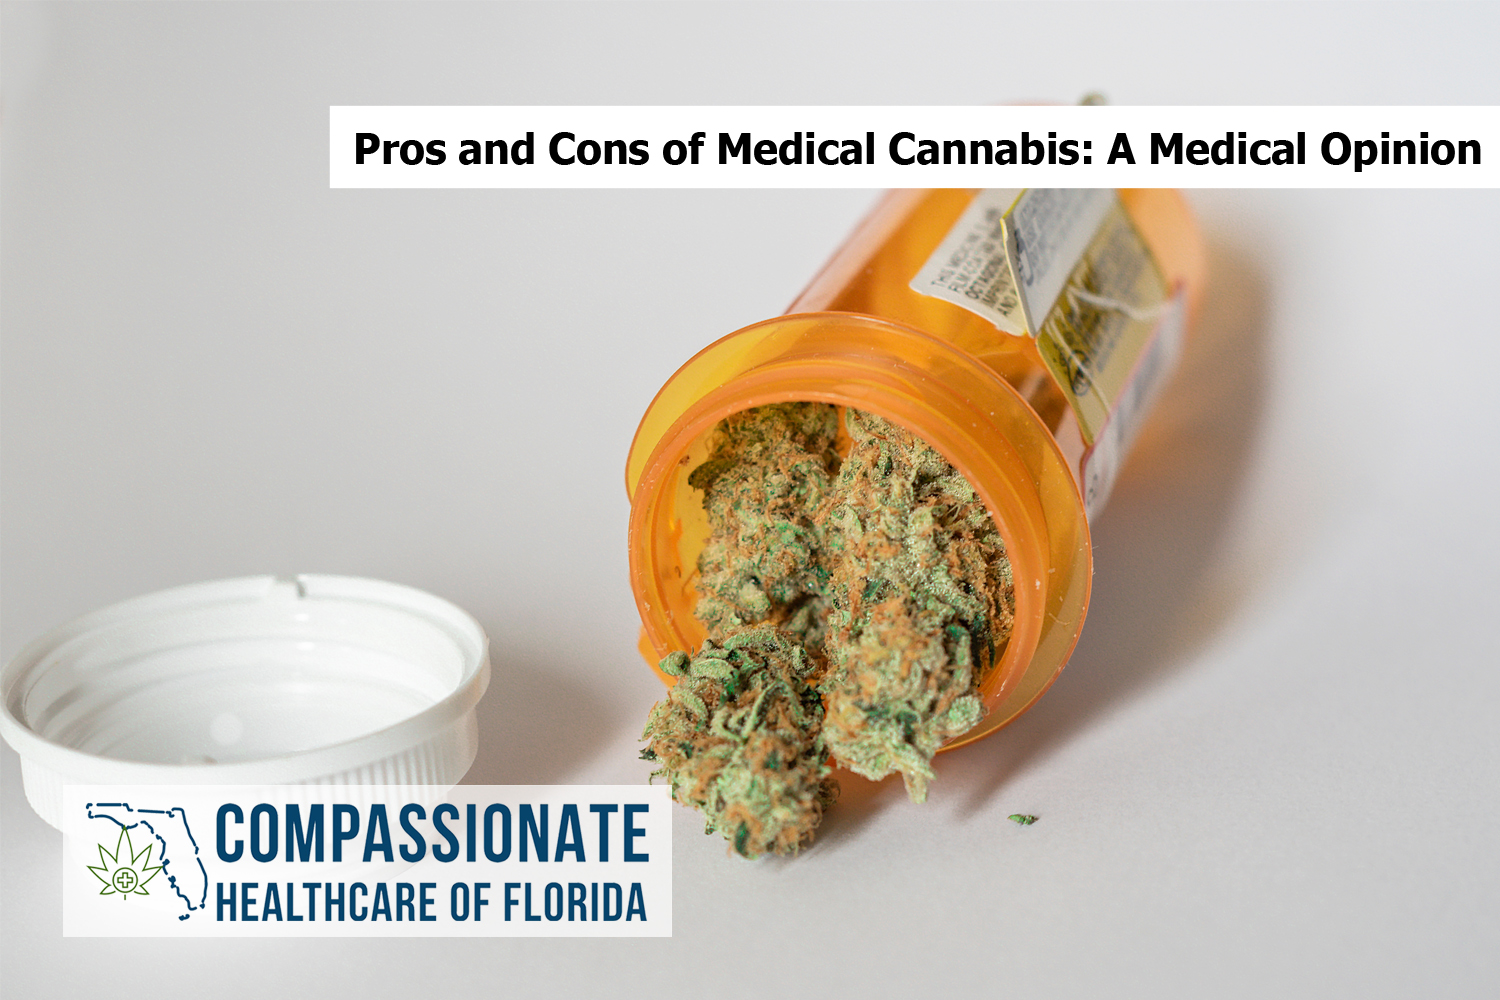 Pros and Cons of Medical Cannabis: A Medical Opinion